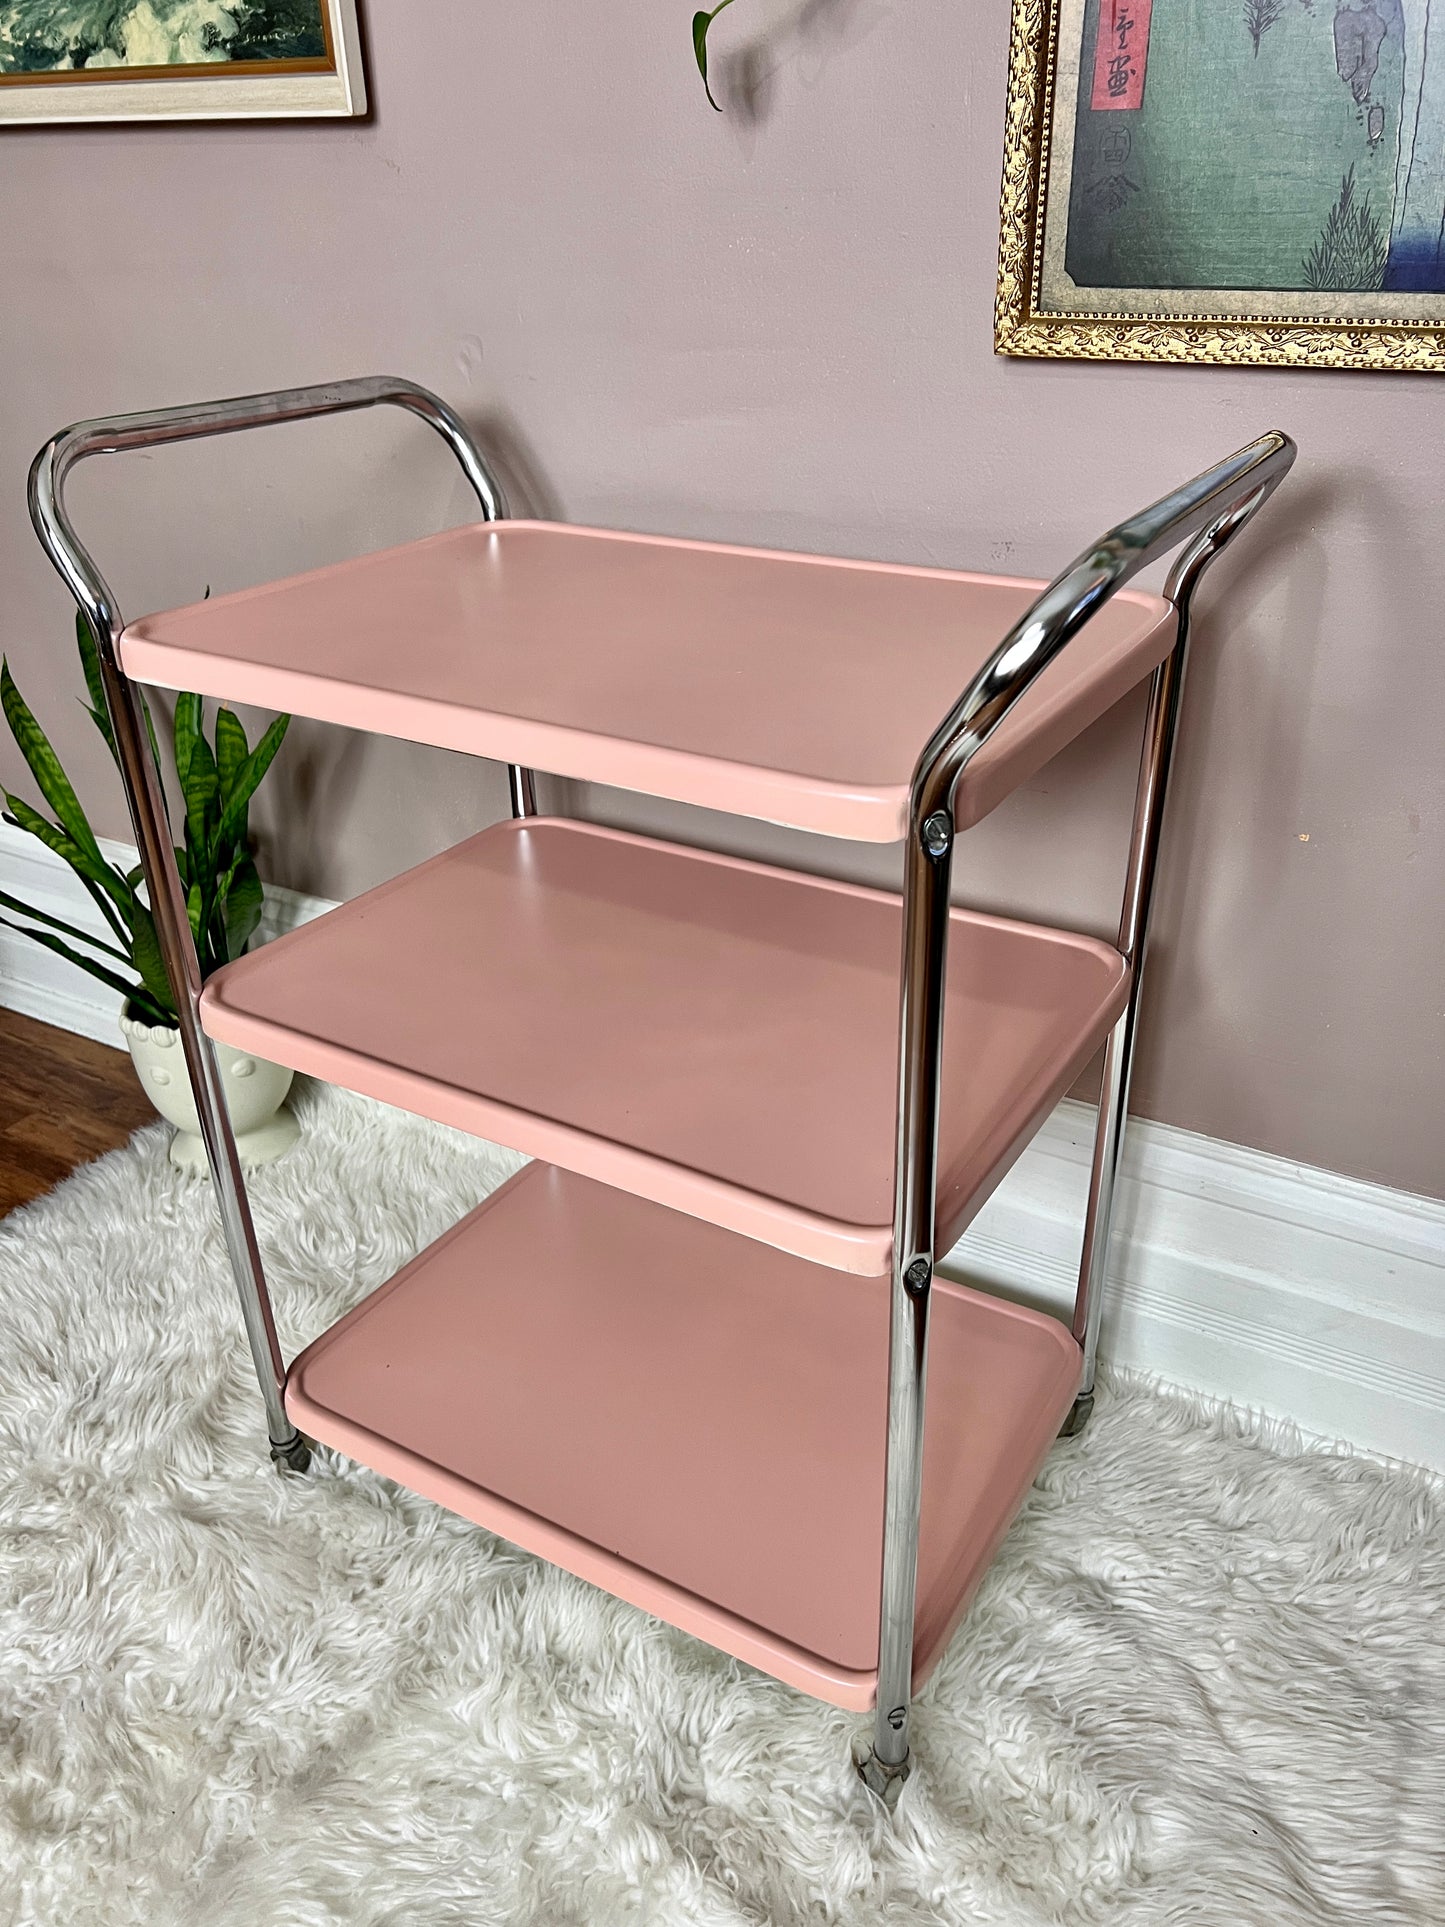 The Rustic Pink Cart